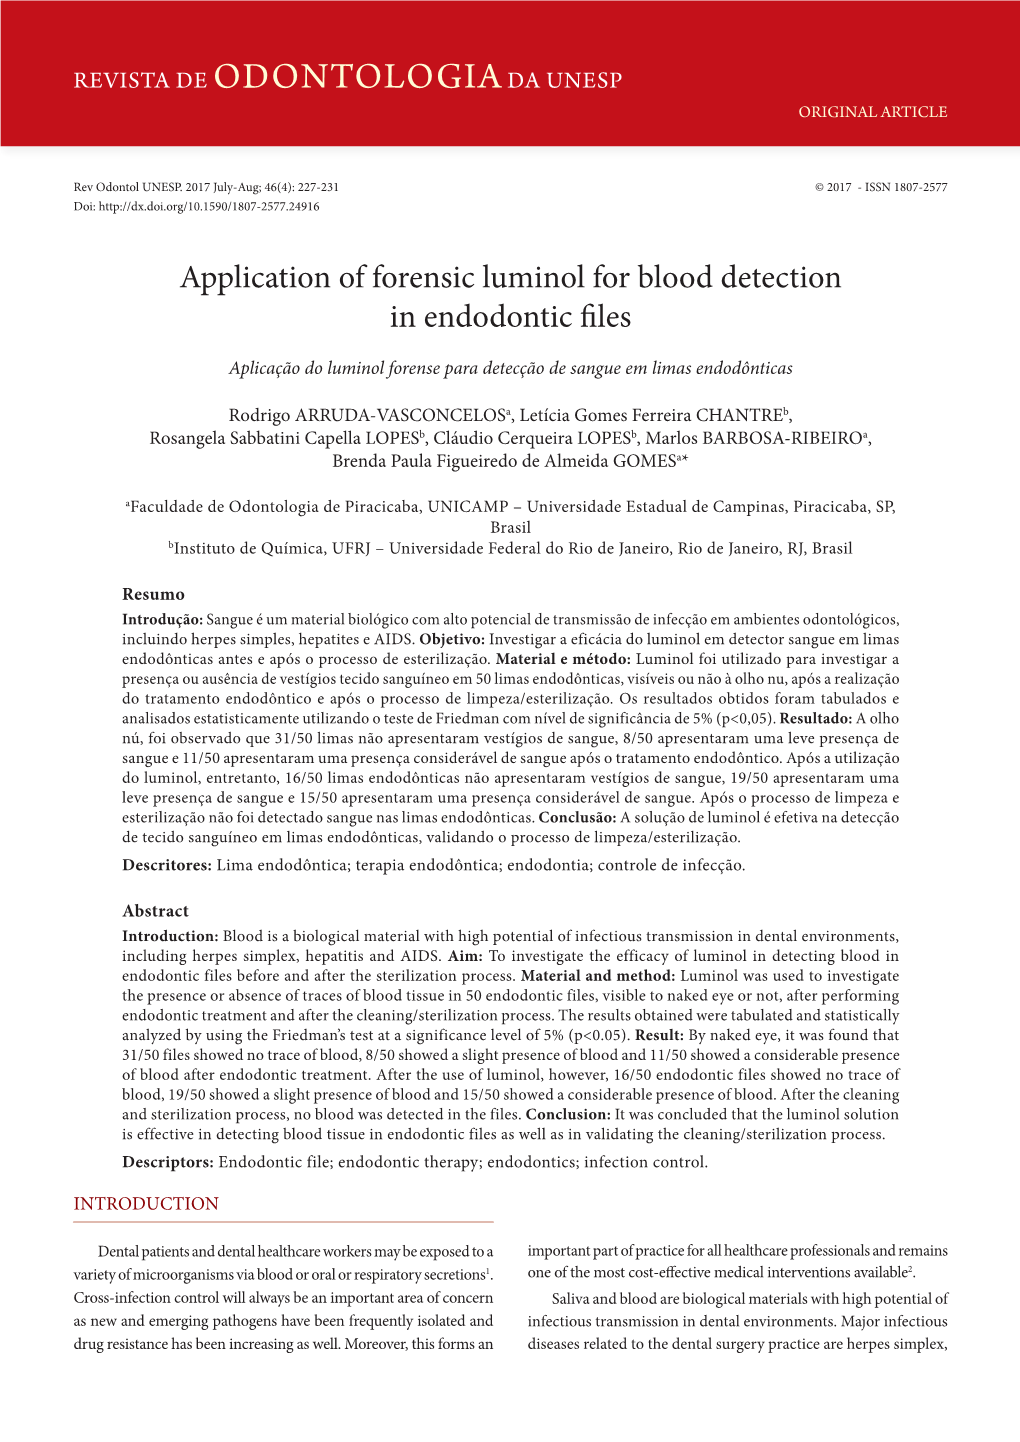 Application of Forensic Luminol for Blood Detection in Endodontic Files